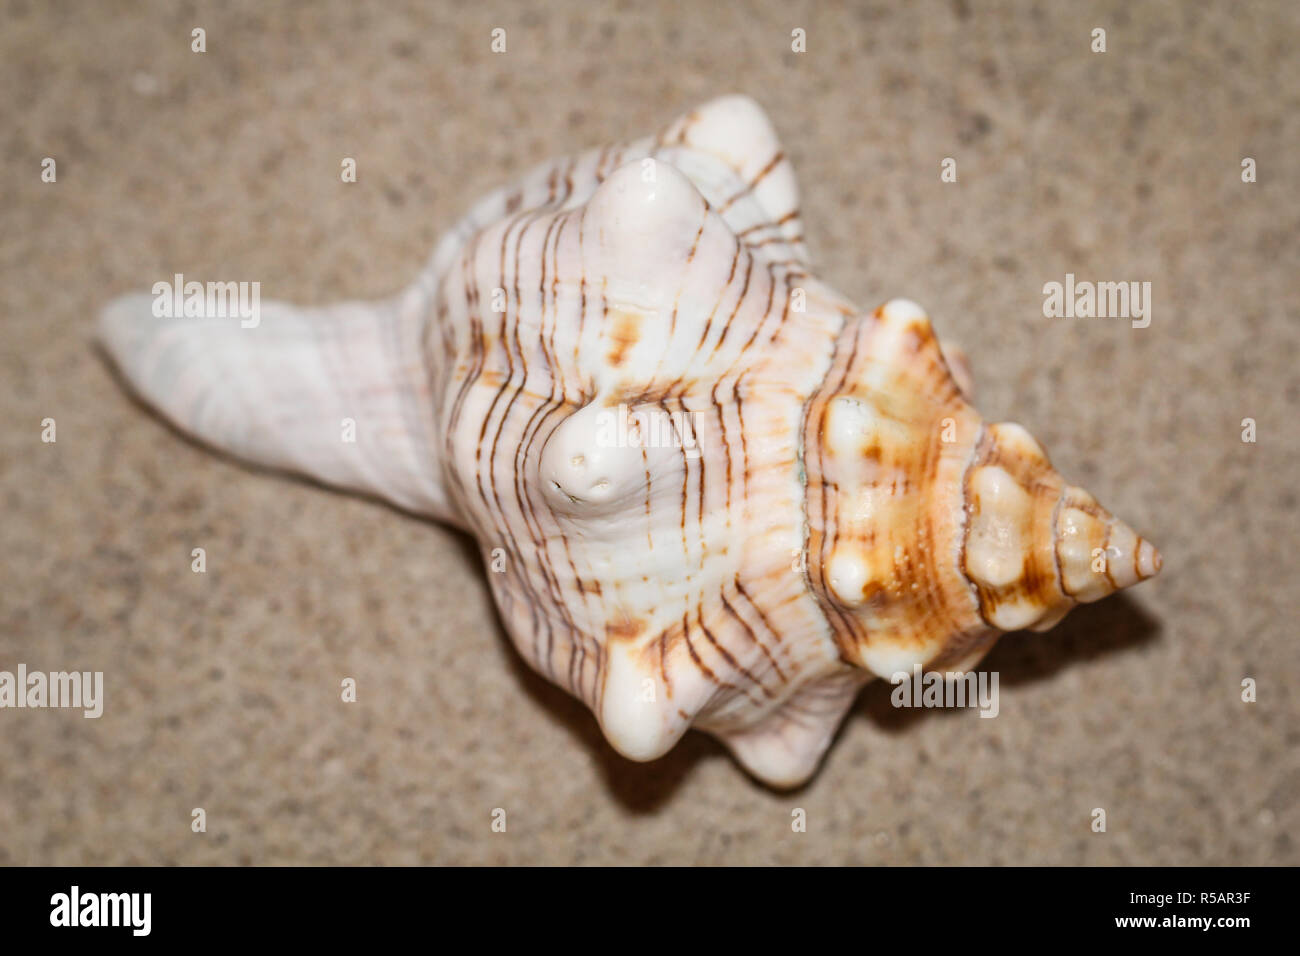 clam snail in the sand,vacation,nature Stock Photo